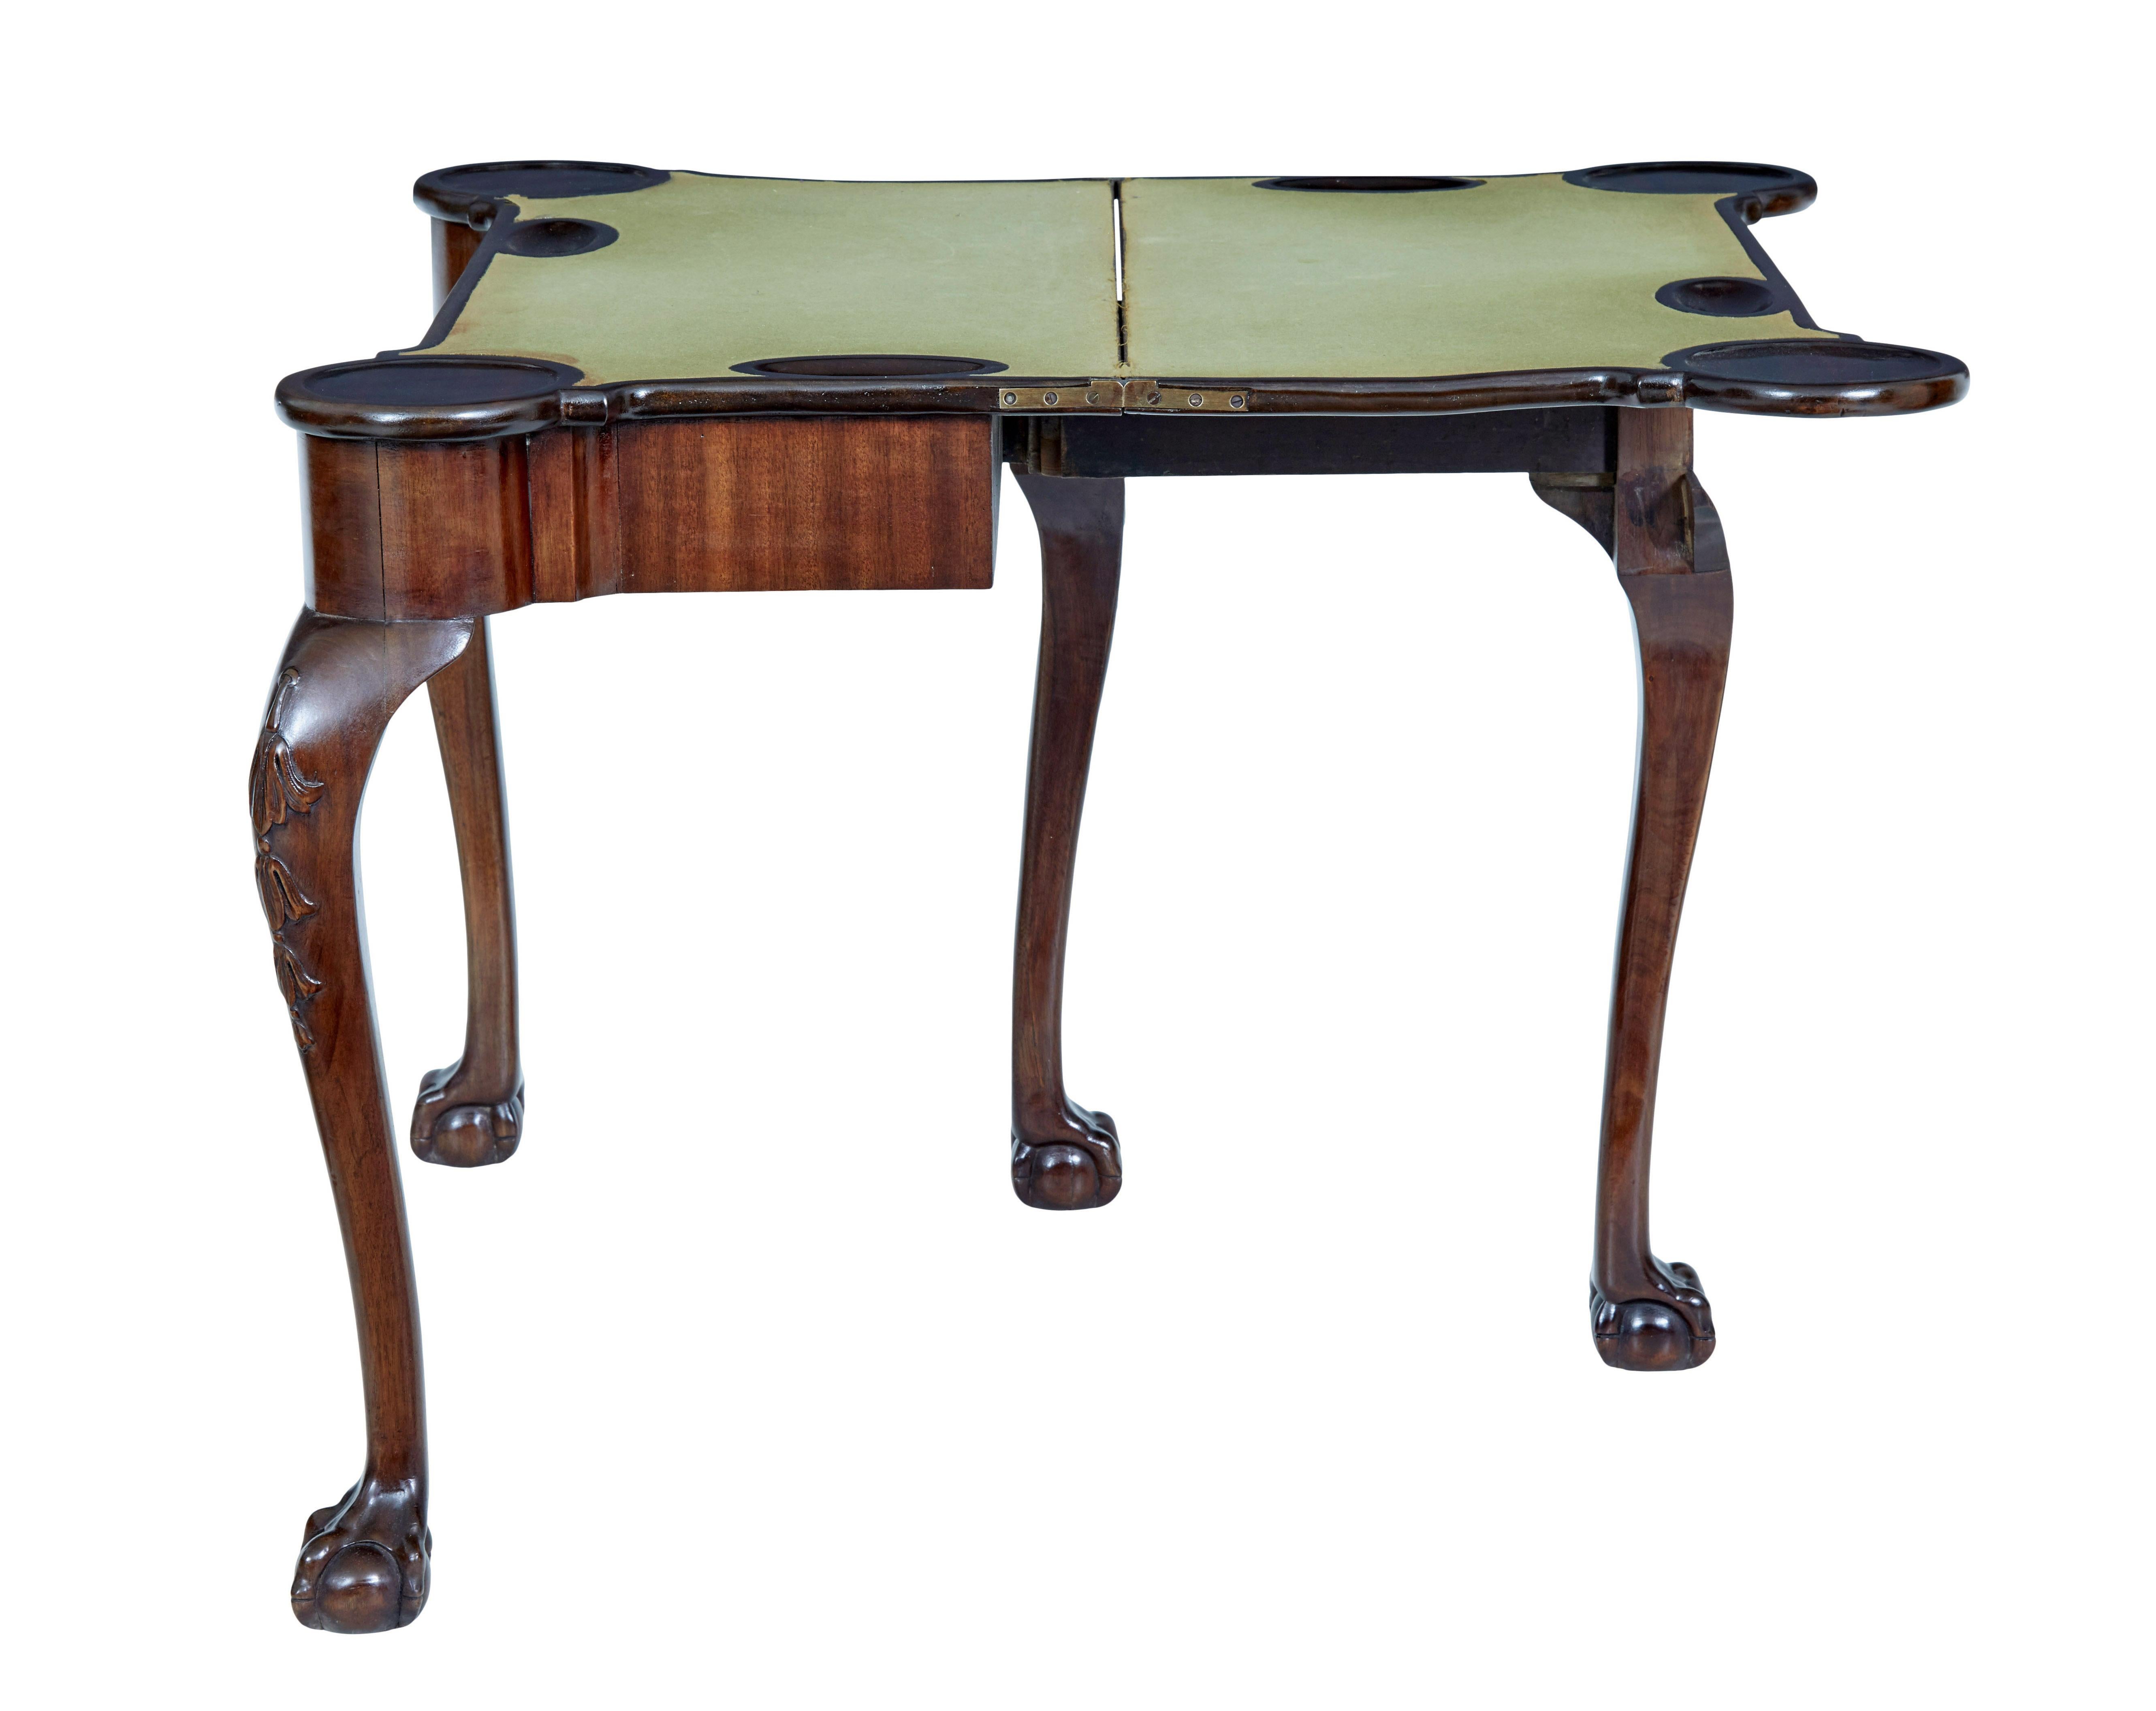 19th century Chippendale revival mahogany card table In Good Condition For Sale In Debenham, Suffolk